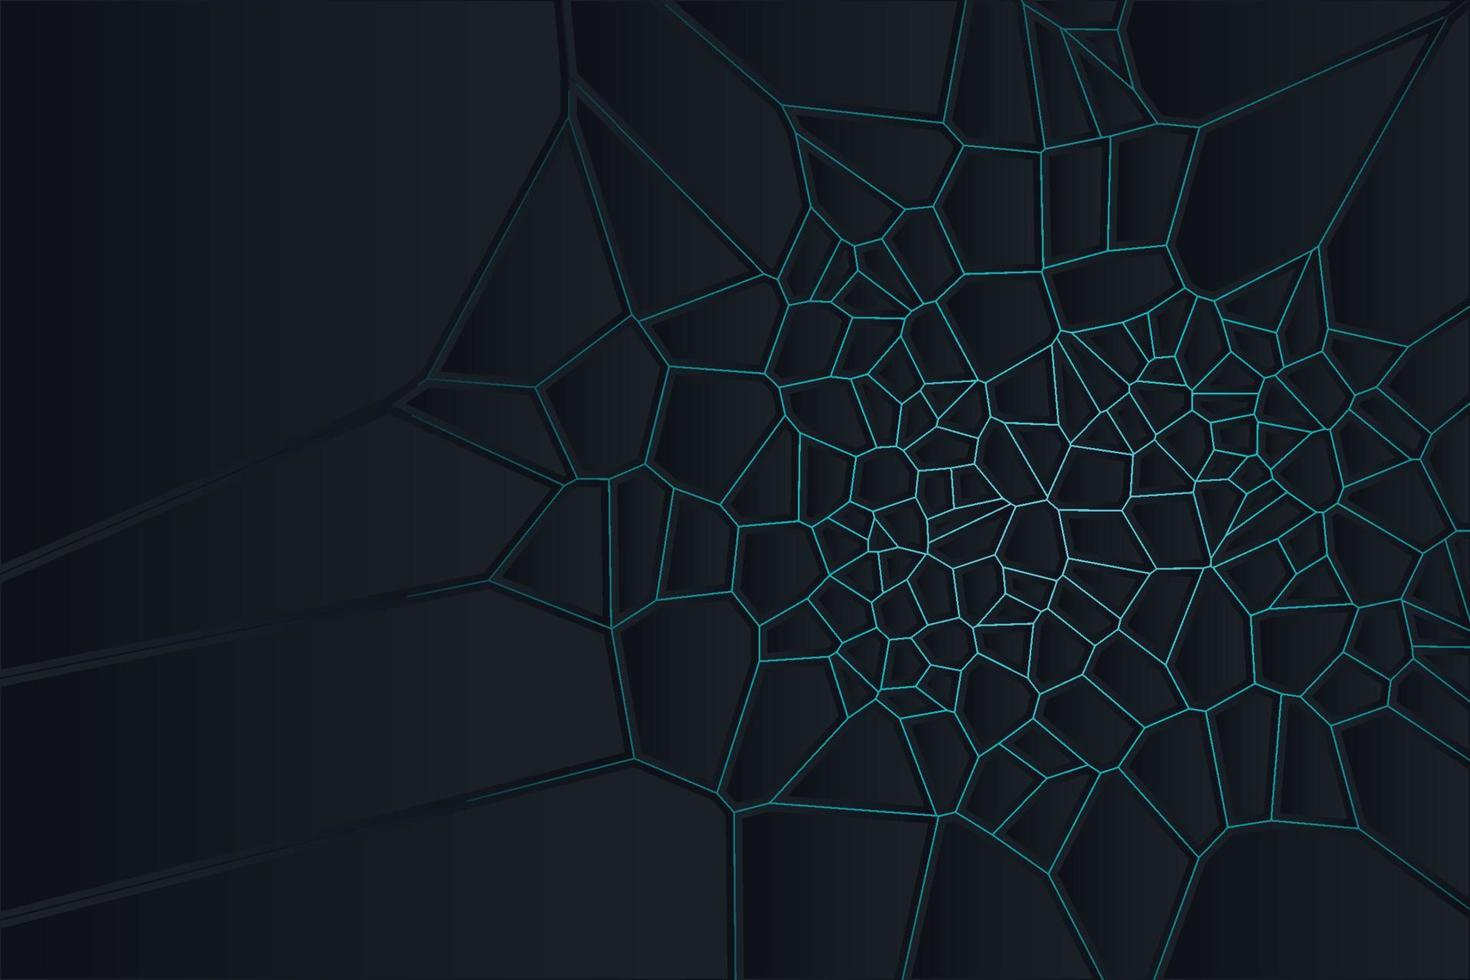 Black illustration of Voronoi diagram decorative background in geometric style with gradient backlight vector